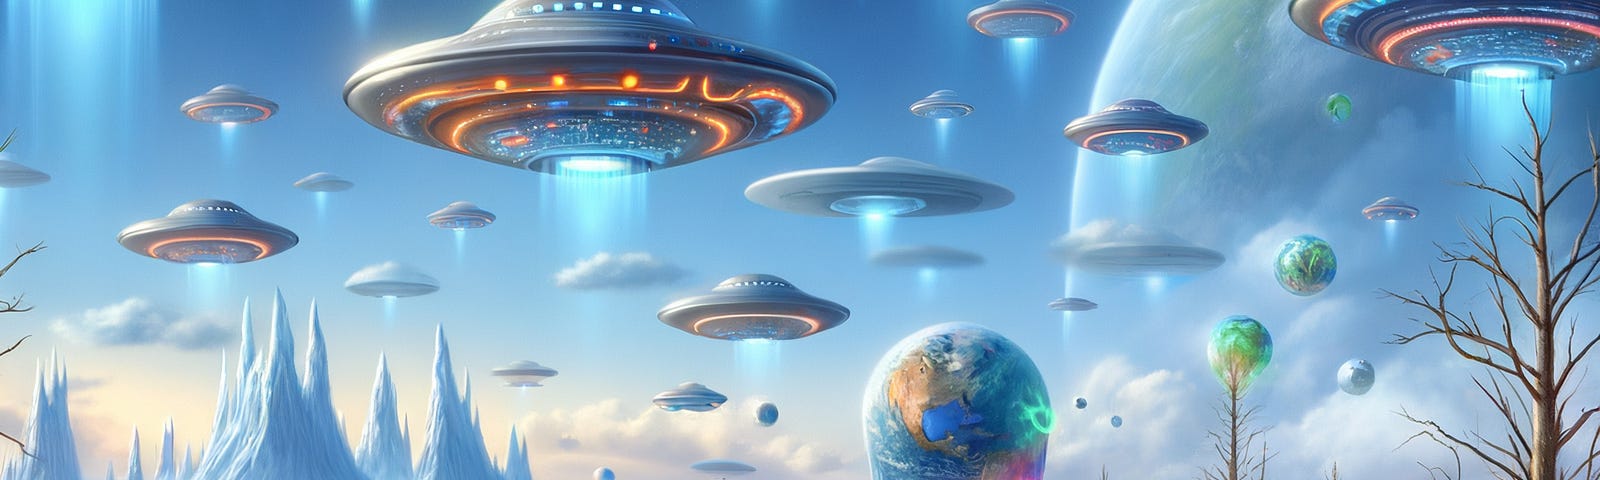 a landscape with flying saucers, ufos, androids and humans